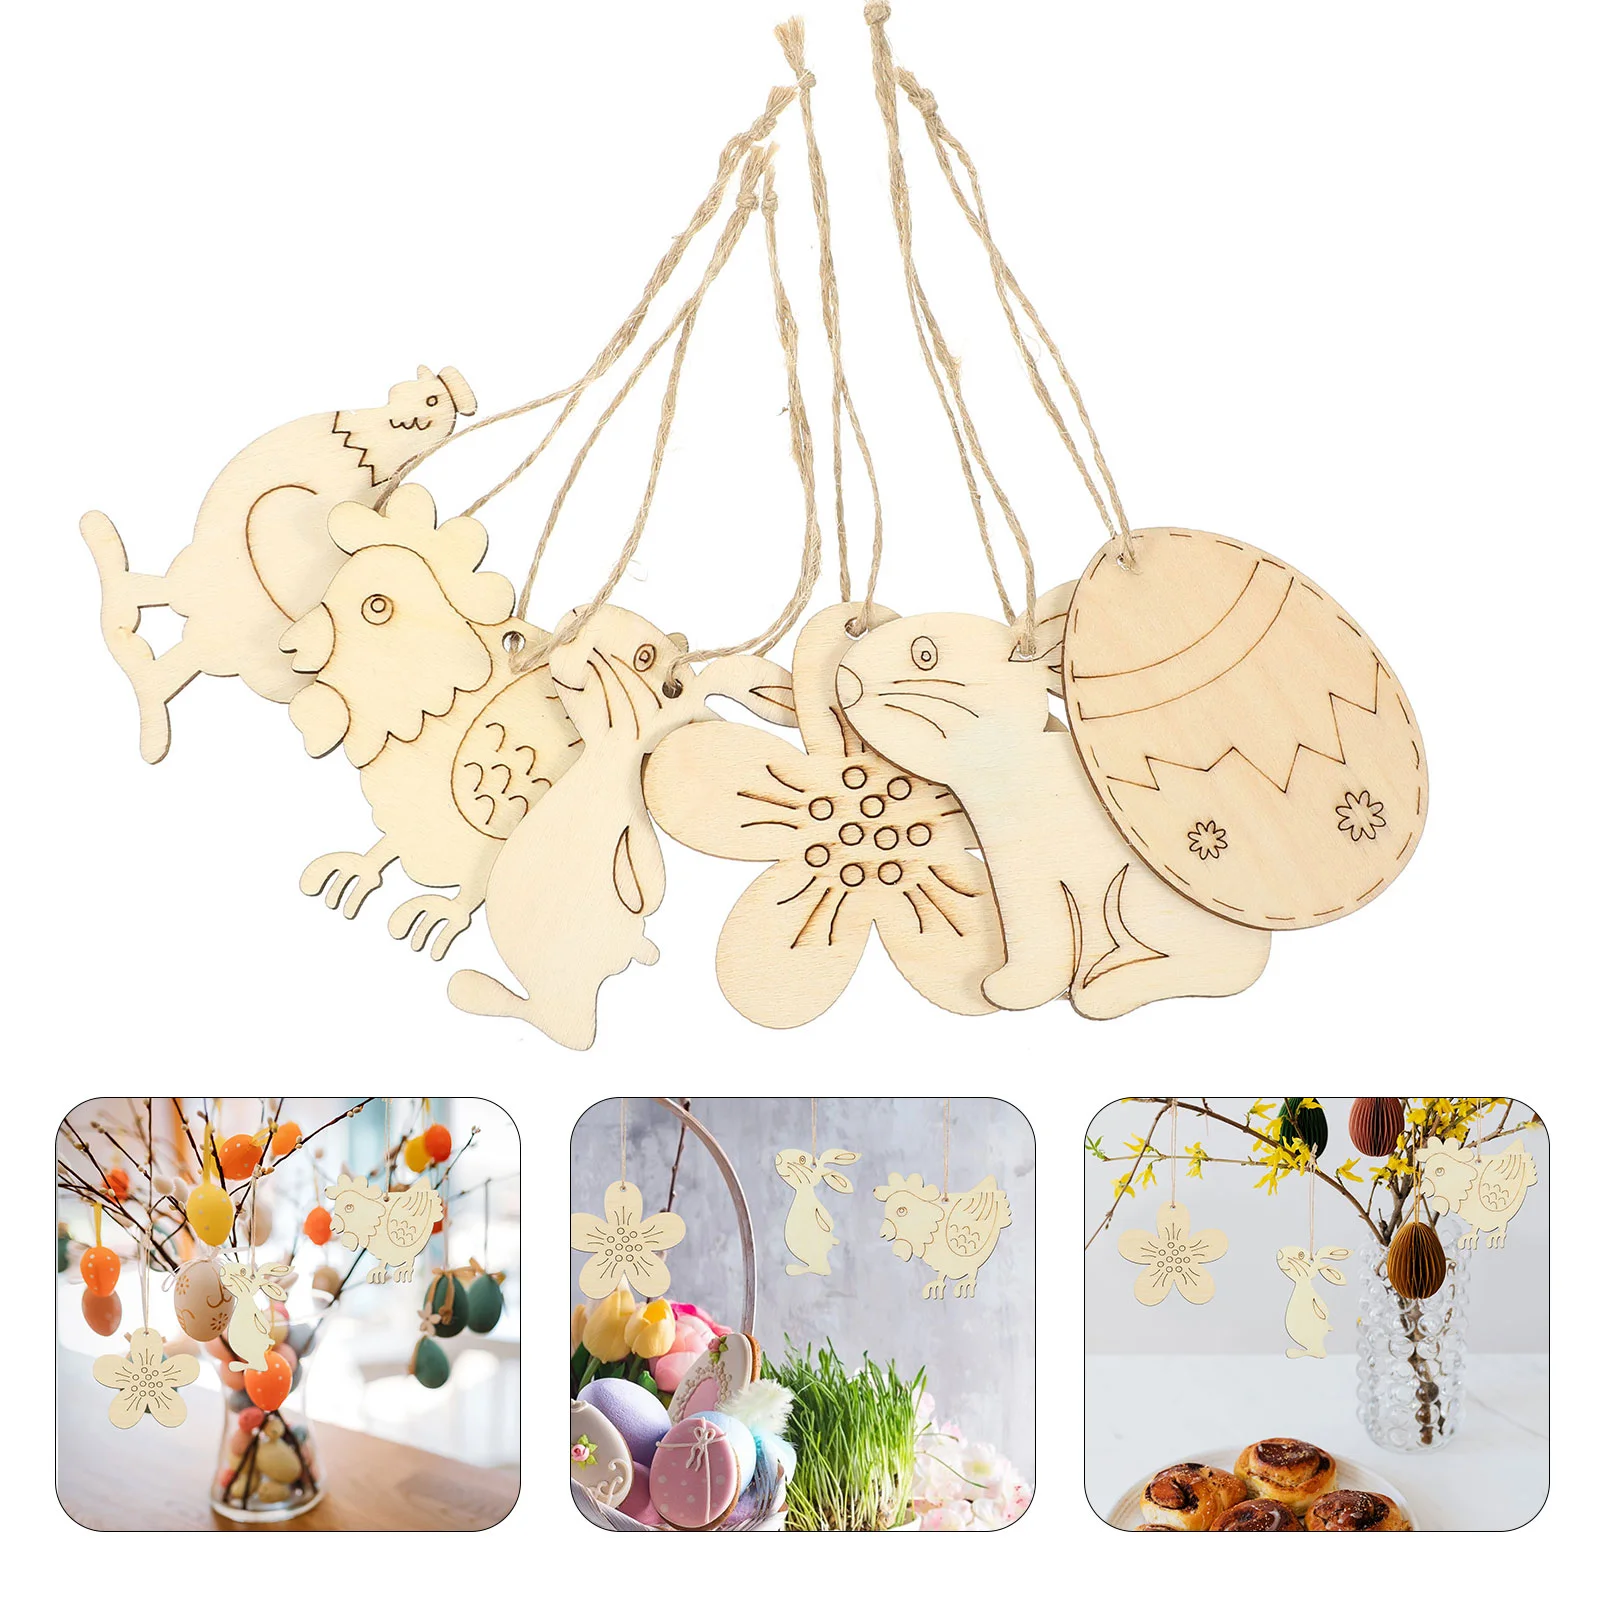 

60 Pcs Easter Ornaments Unfinished Wooden Discs Bunny Shaped Chips Crafts Eggs Cutout Slices For Decorative Shapes Cutouts